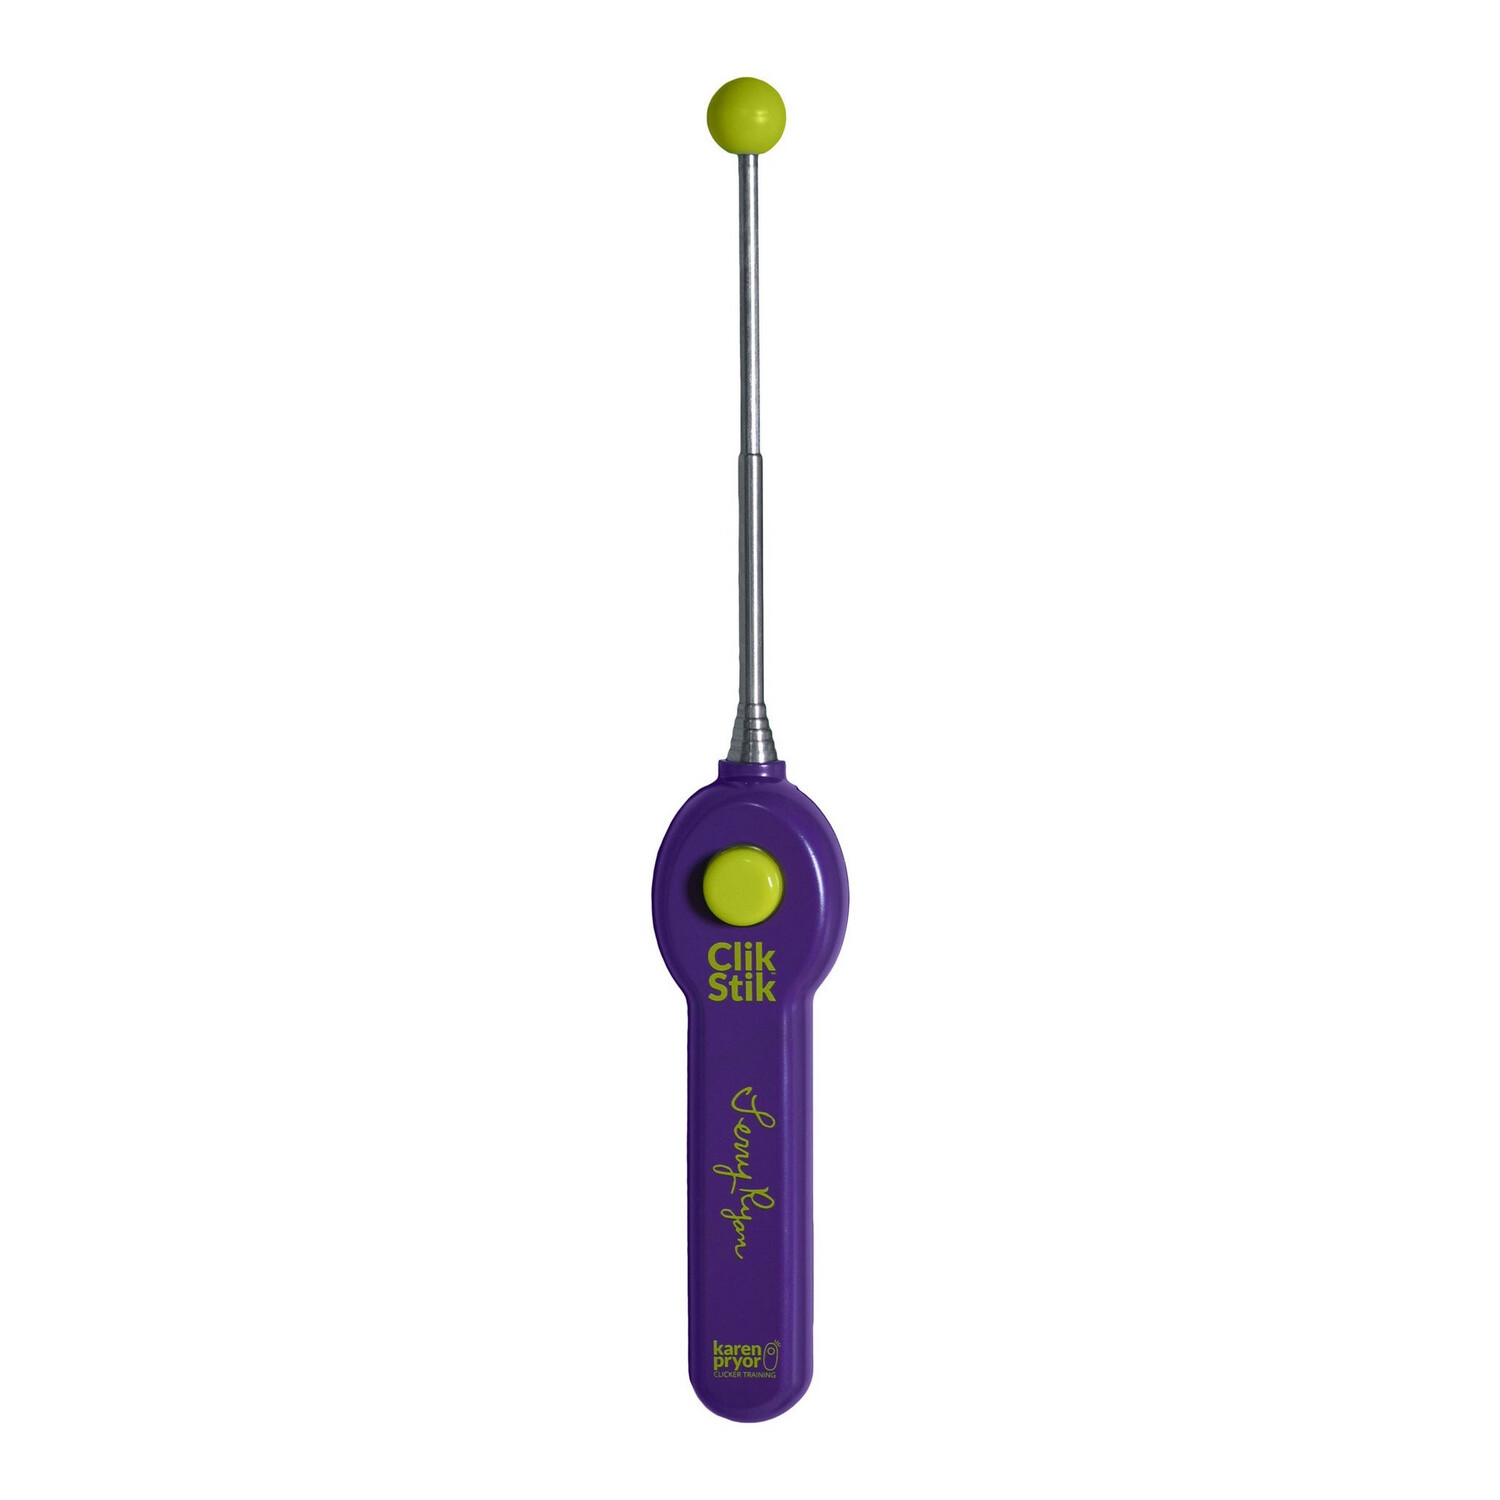 Clik Stik — Retractable Target Stick and Clicker All In one!